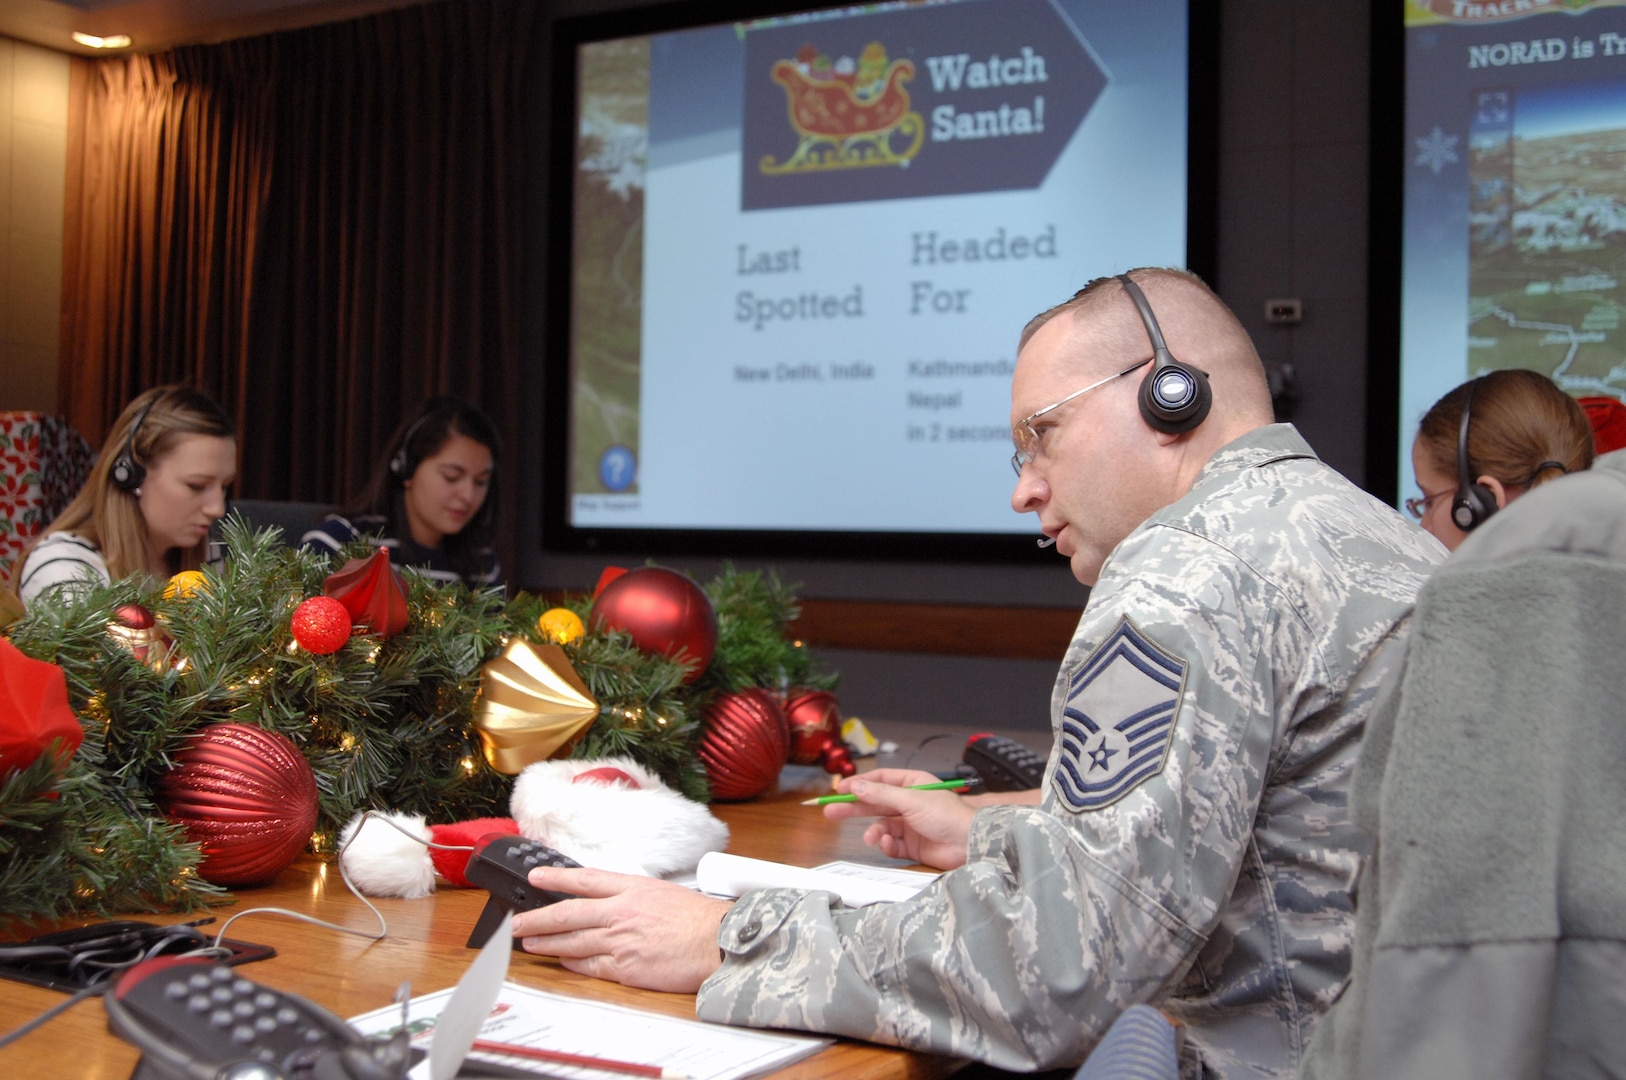 PETERSON AIR FORCE BASE, Colo. - Senior Master Sgt. Christopher Kozel, NORAD and USNORTHCOM J34, takes calls at the NORAD Tracks Santa Operations Center Dec. 24, 2012. Volunteers from every U.S. and Canadian military branch came out to volunteer during the 24 hours NORAD tracked Santa. (U.S. Air Force photo by Tech. Sgt. Thomas J. Doscher)